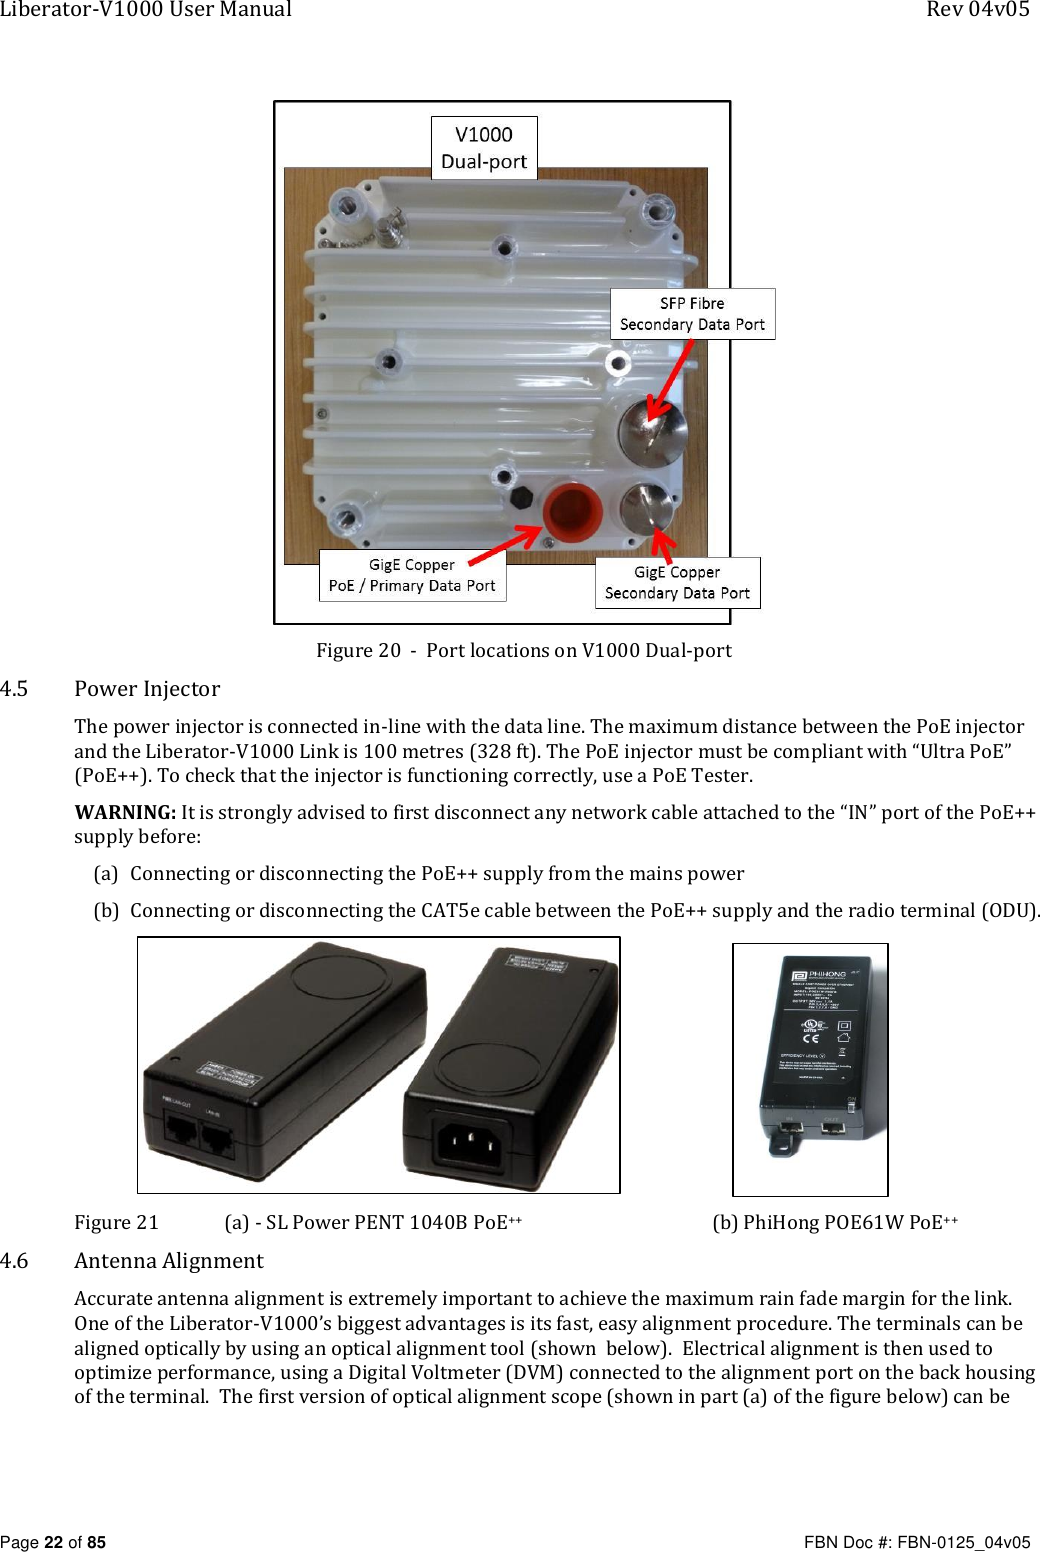 Liberator-V1000 User Manual  Rev 04v05     Page 22 of 85   FBN Doc #: FBN-0125_04v05  Figure 20  -  Port locations on V1000 Dual-port 4.5 Power Injector The power injector is connected in-line with the data line. The maximum distance between the PoE injector and the Liberator-V1000 Link is 100 metres (328 ft). The PoE injector must be compliant with “Ultra PoE” (PoE++). To check that the injector is functioning correctly, use a PoE Tester. WARNING: It is strongly advised to first disconnect any network cable attached to the “IN” port of the PoE++ supply before:  (a) Connecting or disconnecting the PoE++ supply from the mains power (b) Connecting or disconnecting the CAT5e cable between the PoE++ supply and the radio terminal (ODU).                      Figure 21    (a) - SL Power PENT 1040B PoE++  (b) PhiHong POE61W PoE++ 4.6 Antenna Alignment Accurate antenna alignment is extremely important to achieve the maximum rain fade margin for the link. One of the Liberator-V1000’s biggest advantages is its fast, easy alignment procedure. The terminals can be aligned optically by using an optical alignment tool (shown  below).  Electrical alignment is then used to optimize performance, using a Digital Voltmeter (DVM) connected to the alignment port on the back housing of the terminal.  The first version of optical alignment scope (shown in part (a) of the figure below) can be 